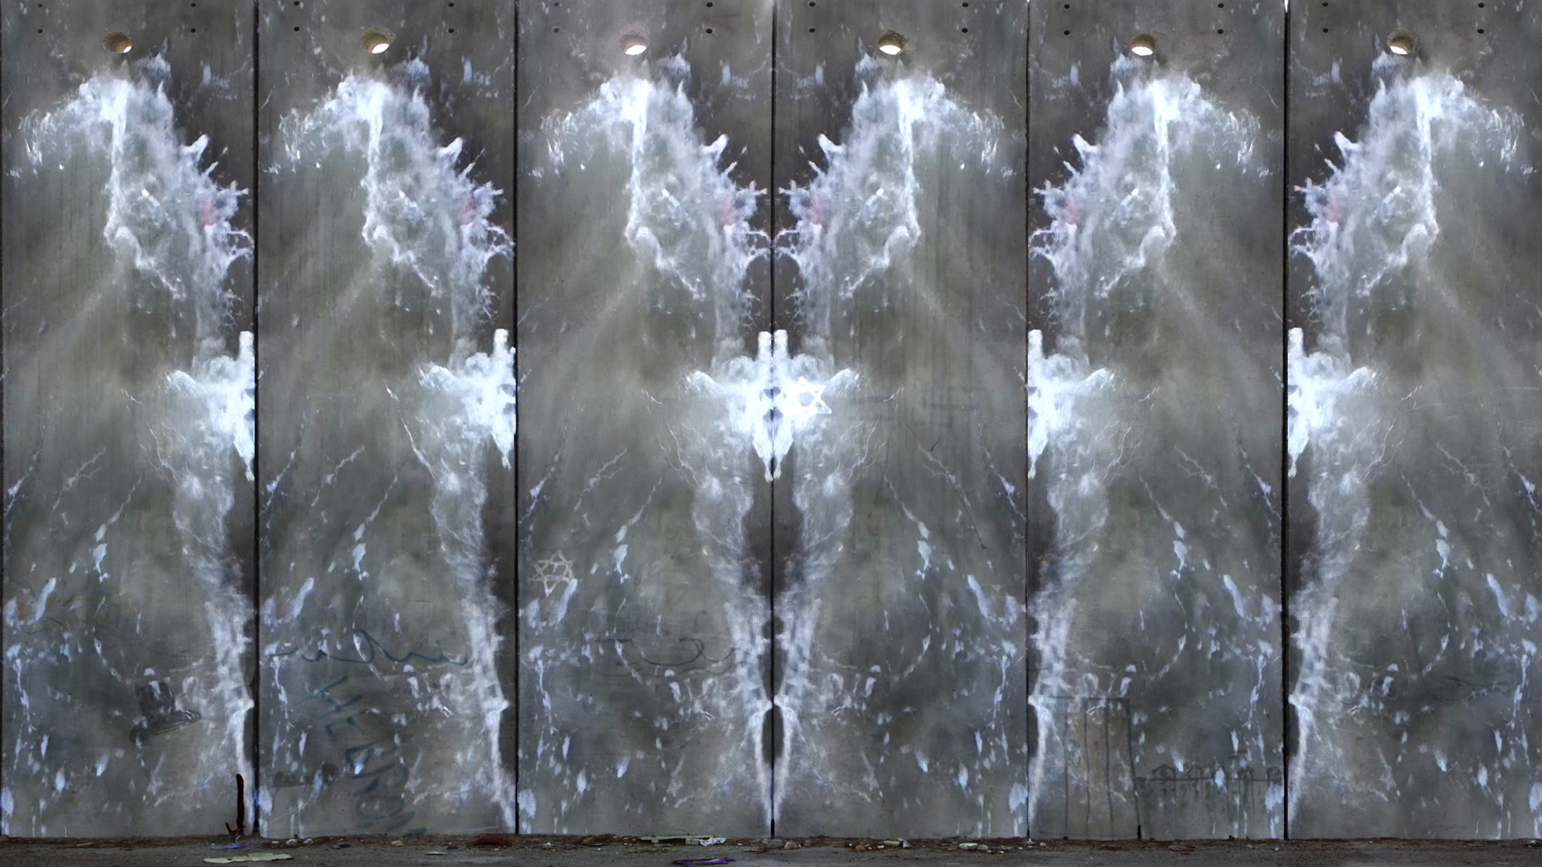 Still of video "Quench" showing a split screen with waves on concrete